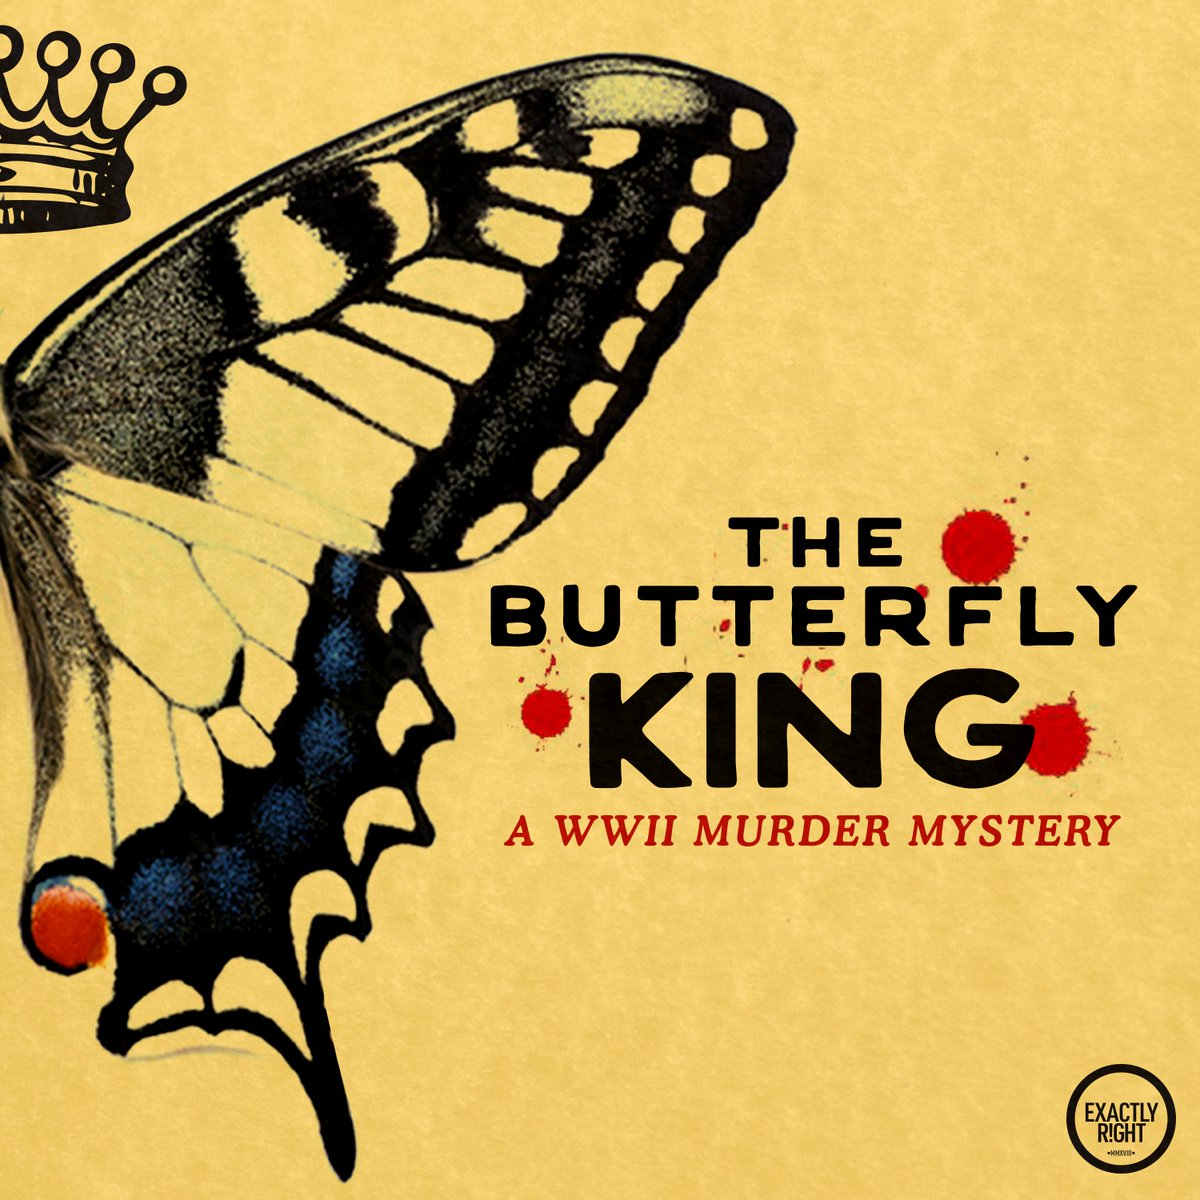 Introducing The Butterfly King, a new true crime series from Exactly Right and Blanchard House premiering Thurs., 3/21. Join journalist Becky Milligan as she unravels 80 years of deceit and cover-ups to answer one question: Who killed the Butterfly King? podcasts.apple.com/us/podcast/the…